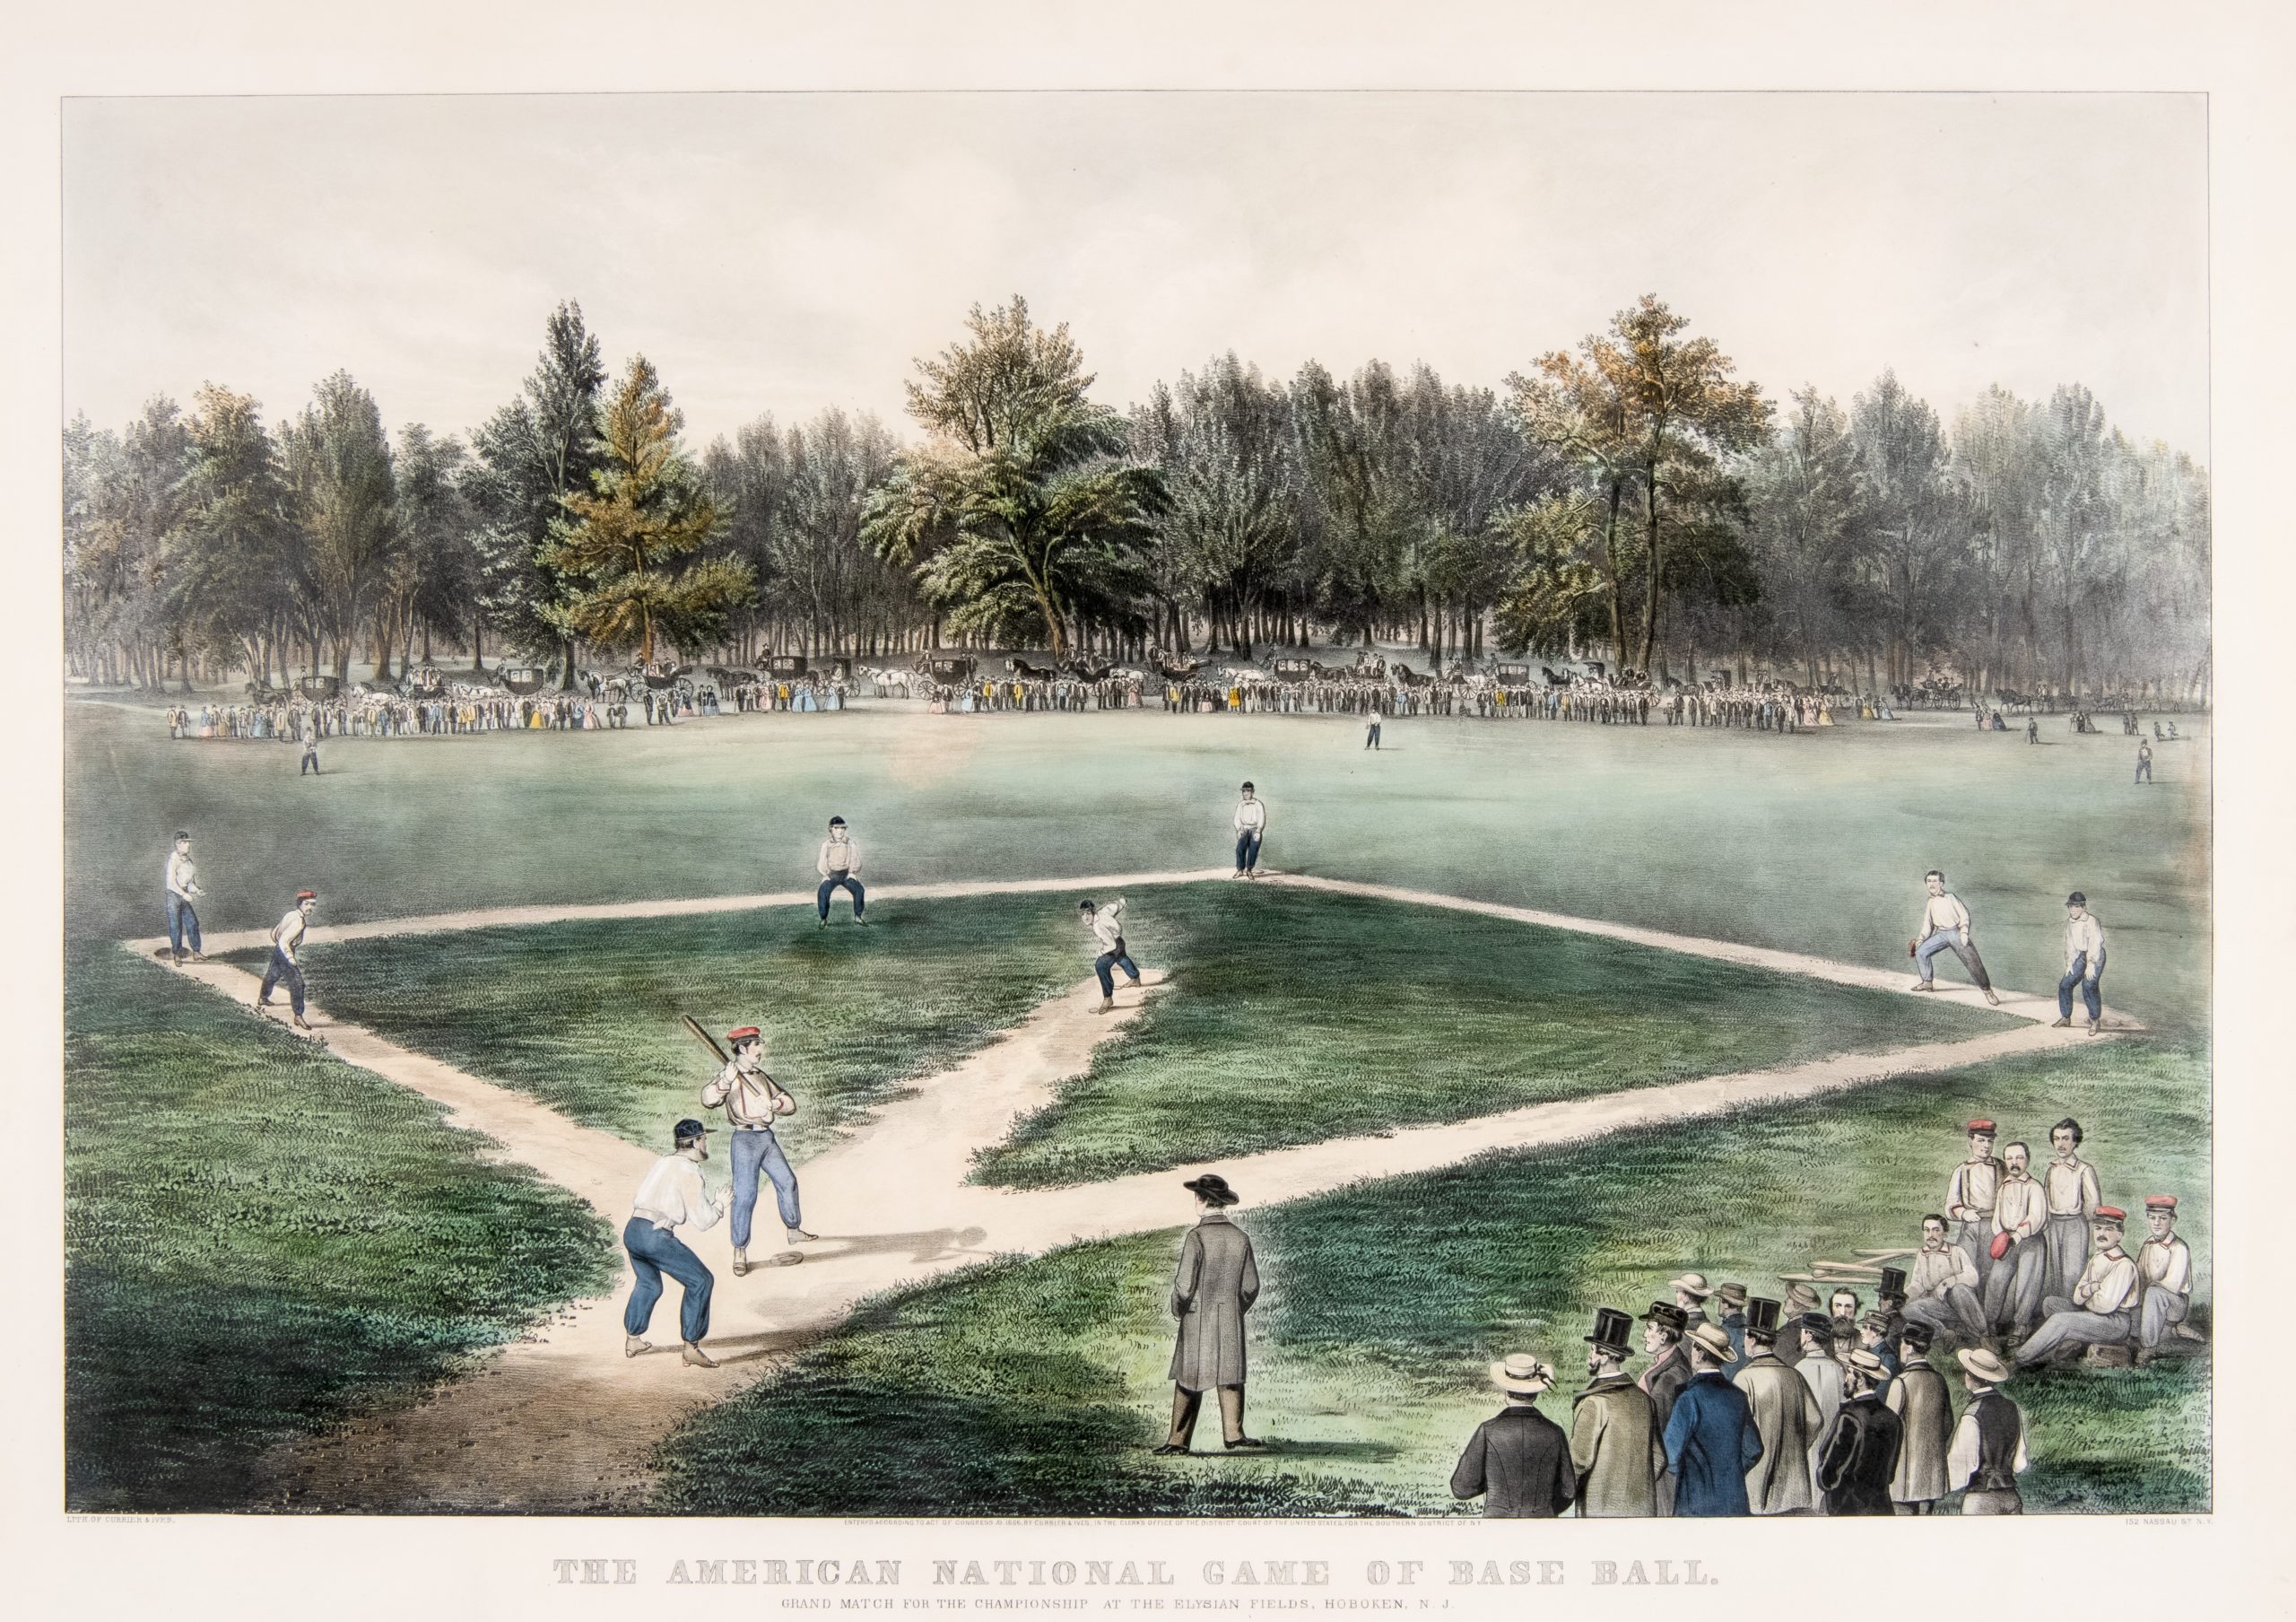 The American National Game of Base Ball